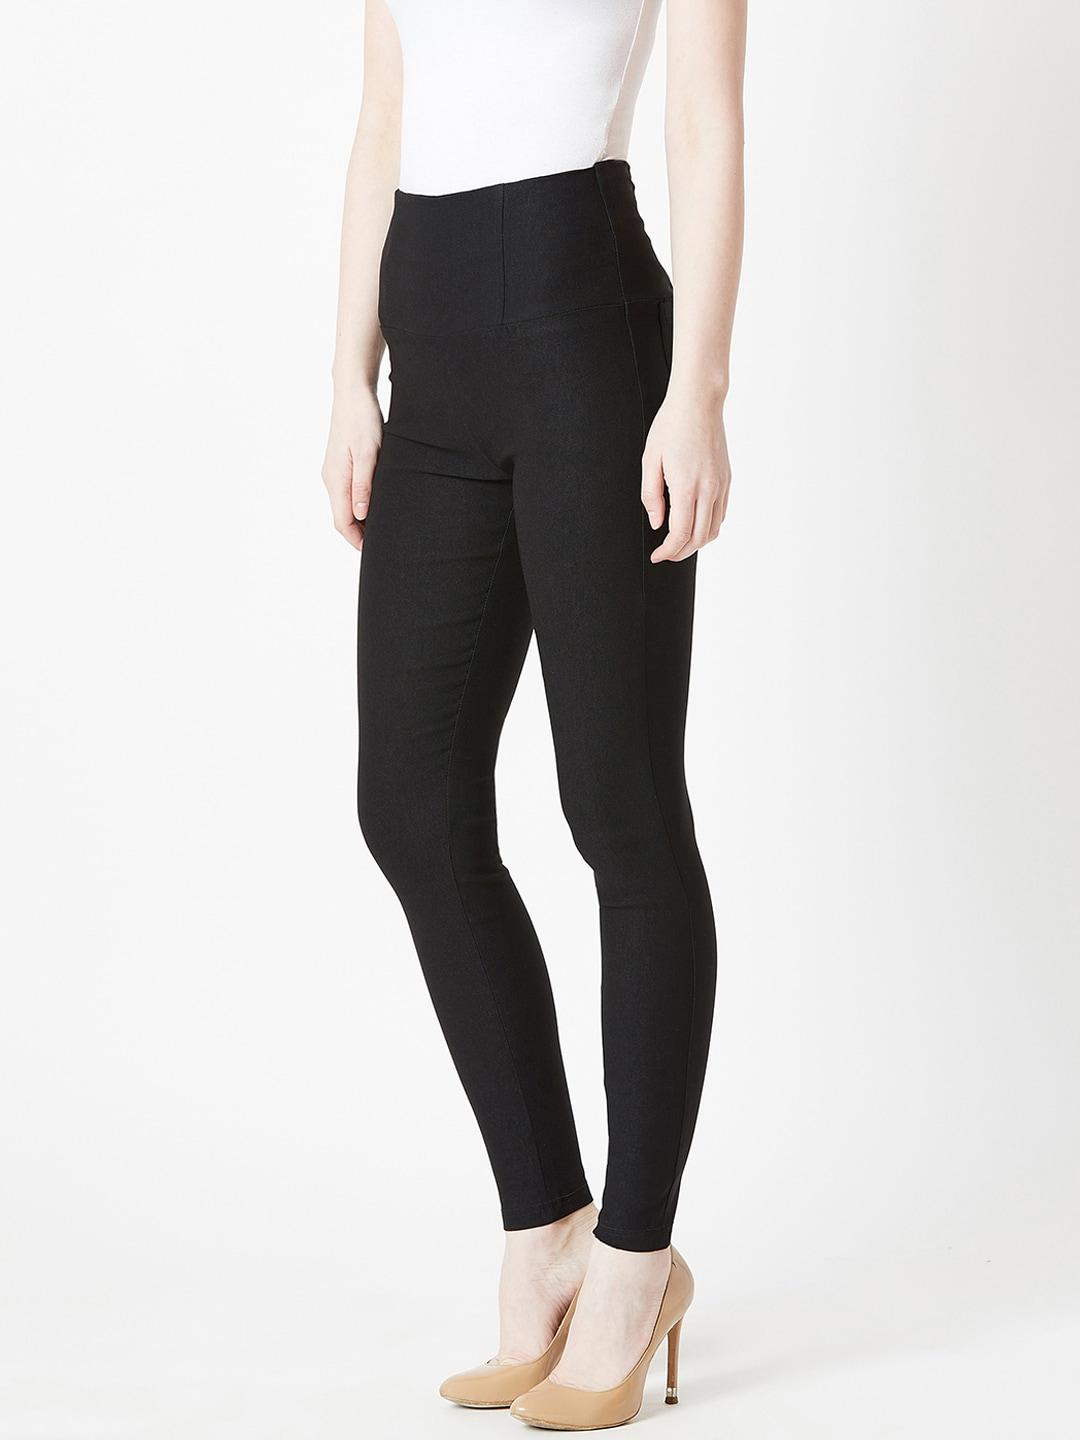 miss-chase-high-waist-jeggings